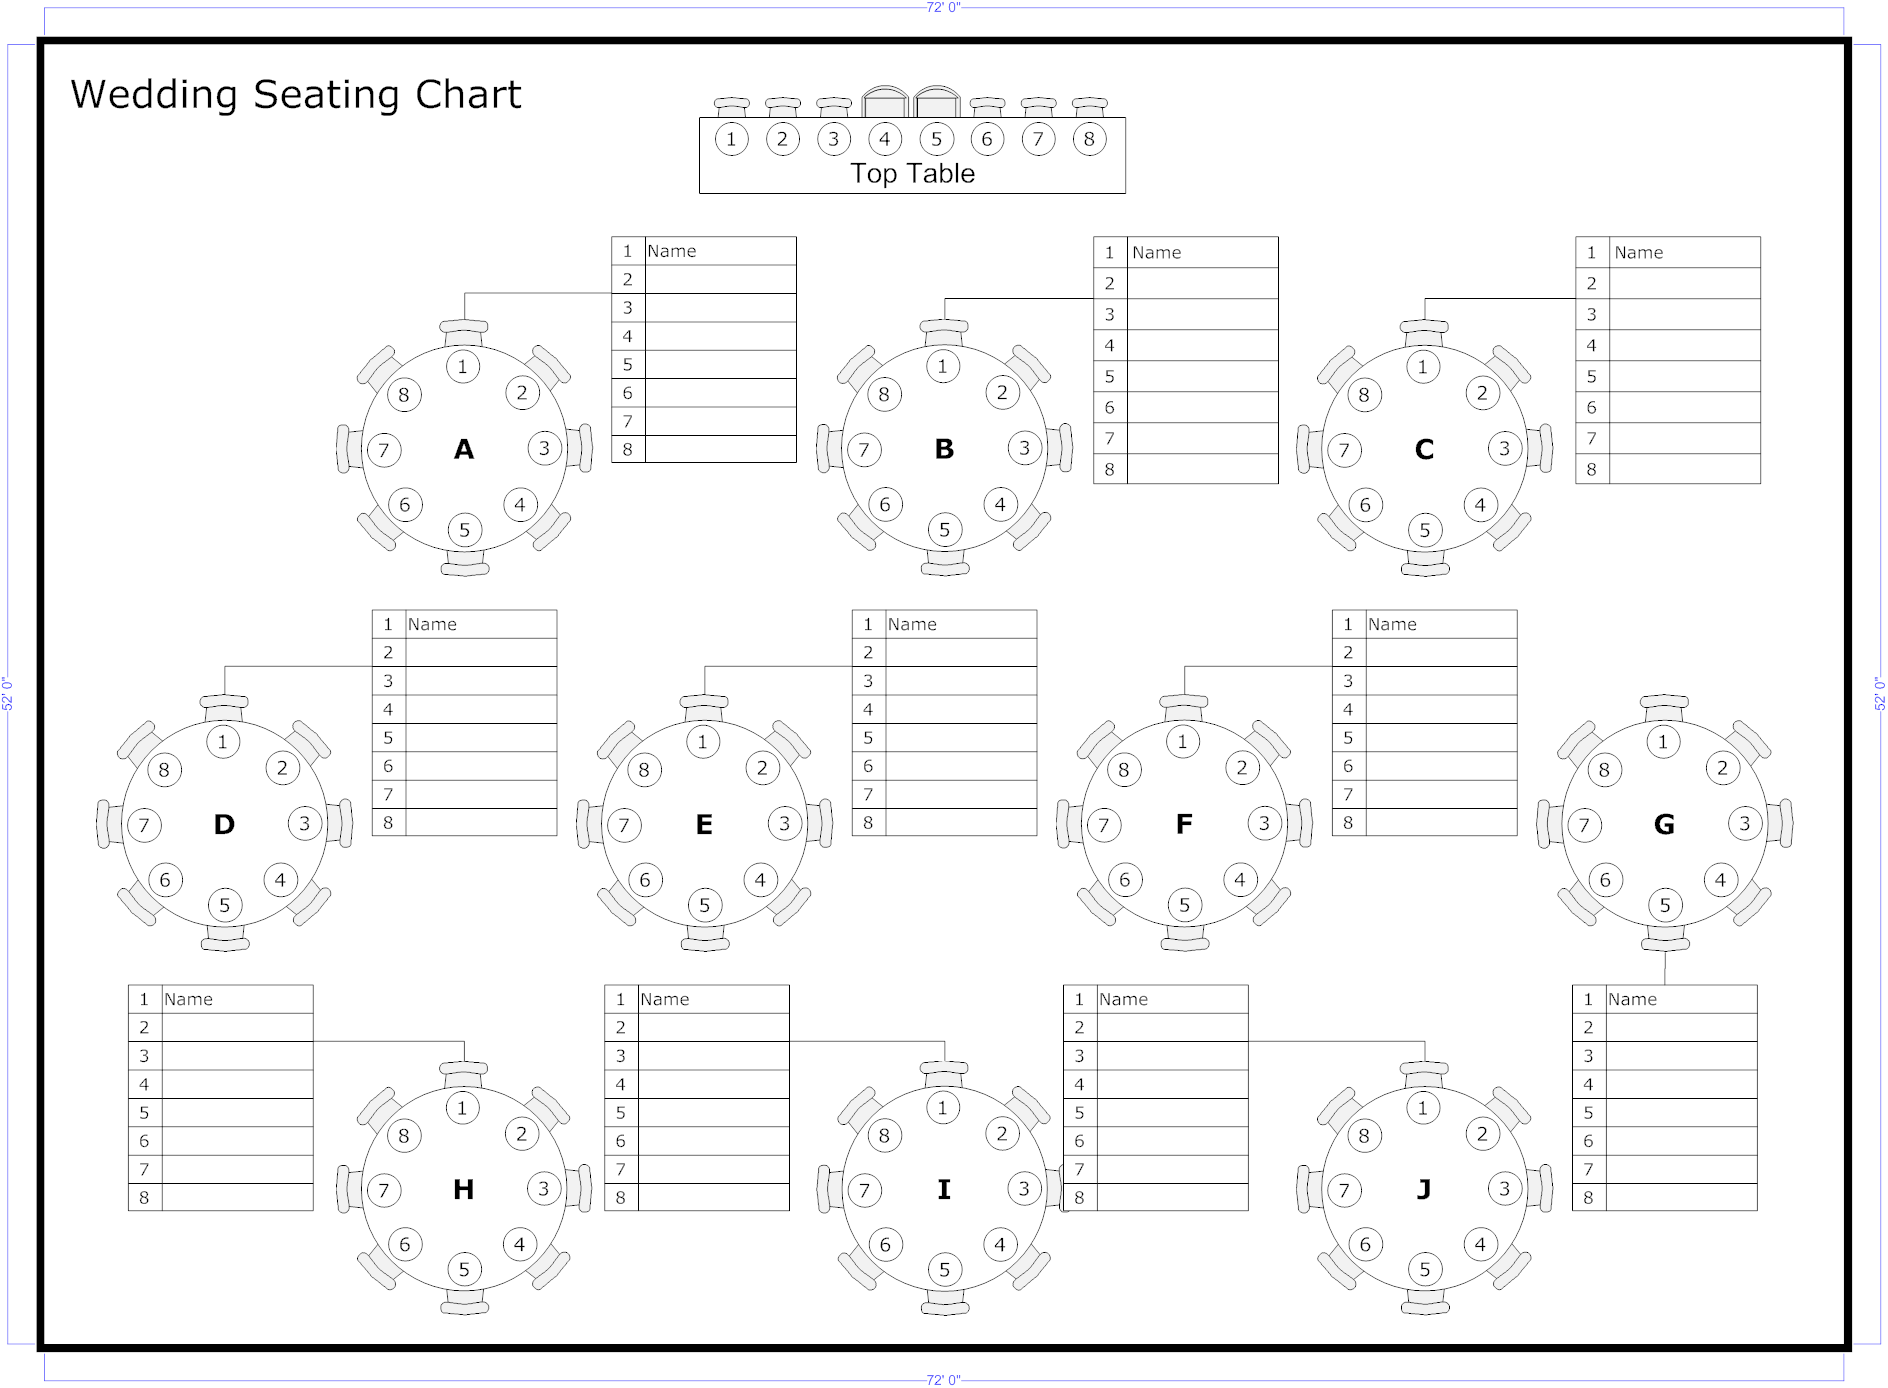 Wedding Seating Chart Maker The Knot